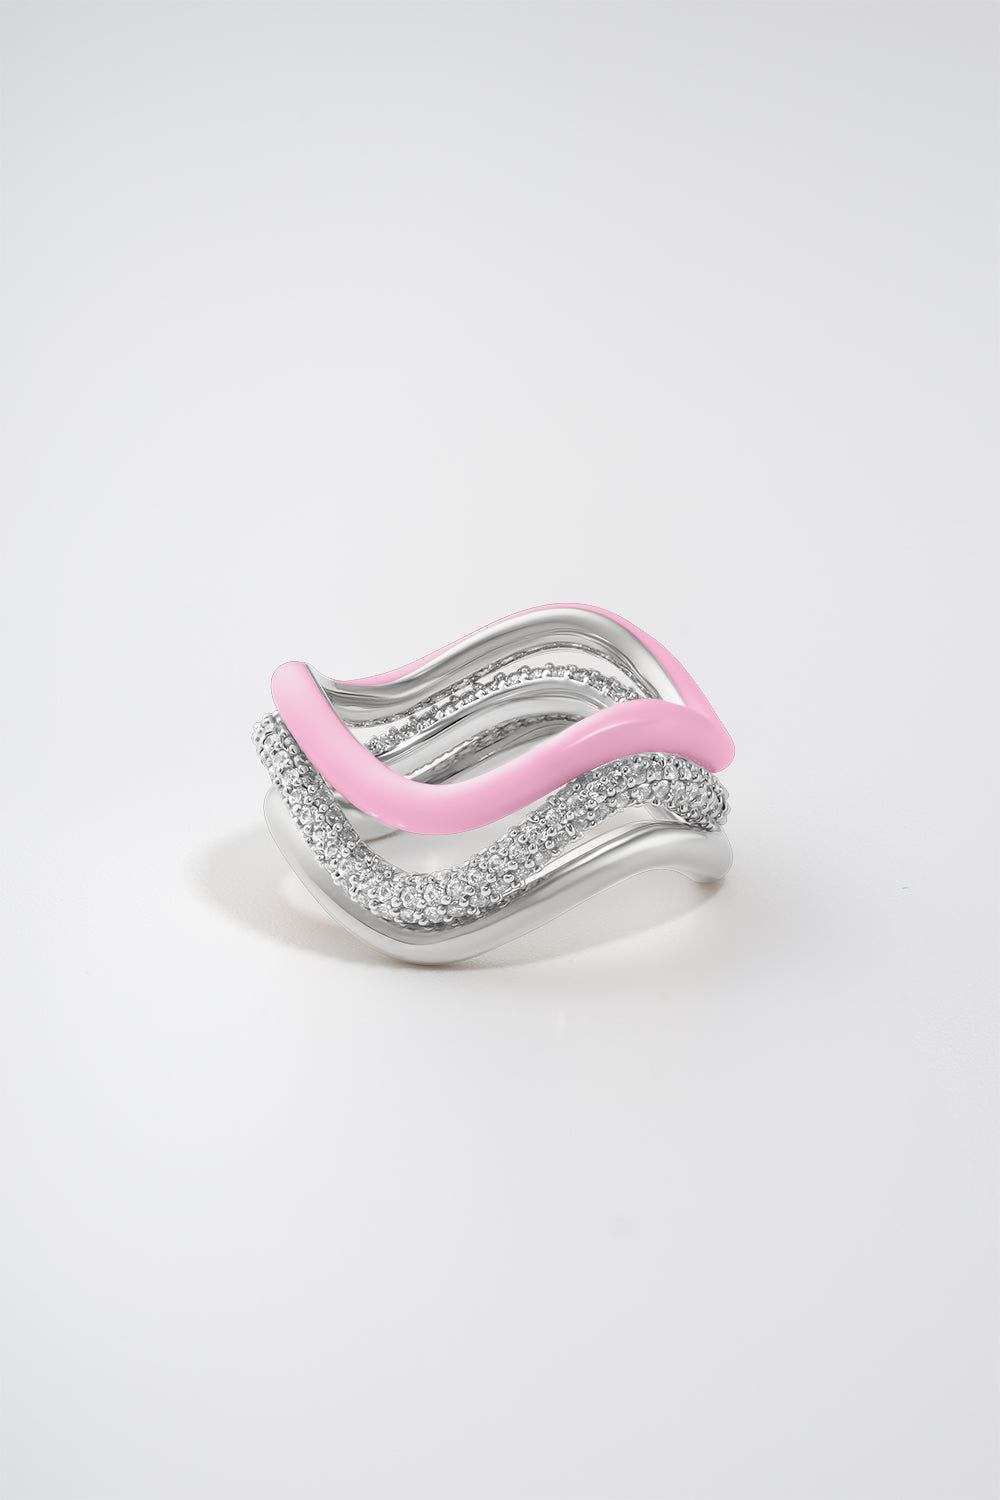 Costal Tripled Ring